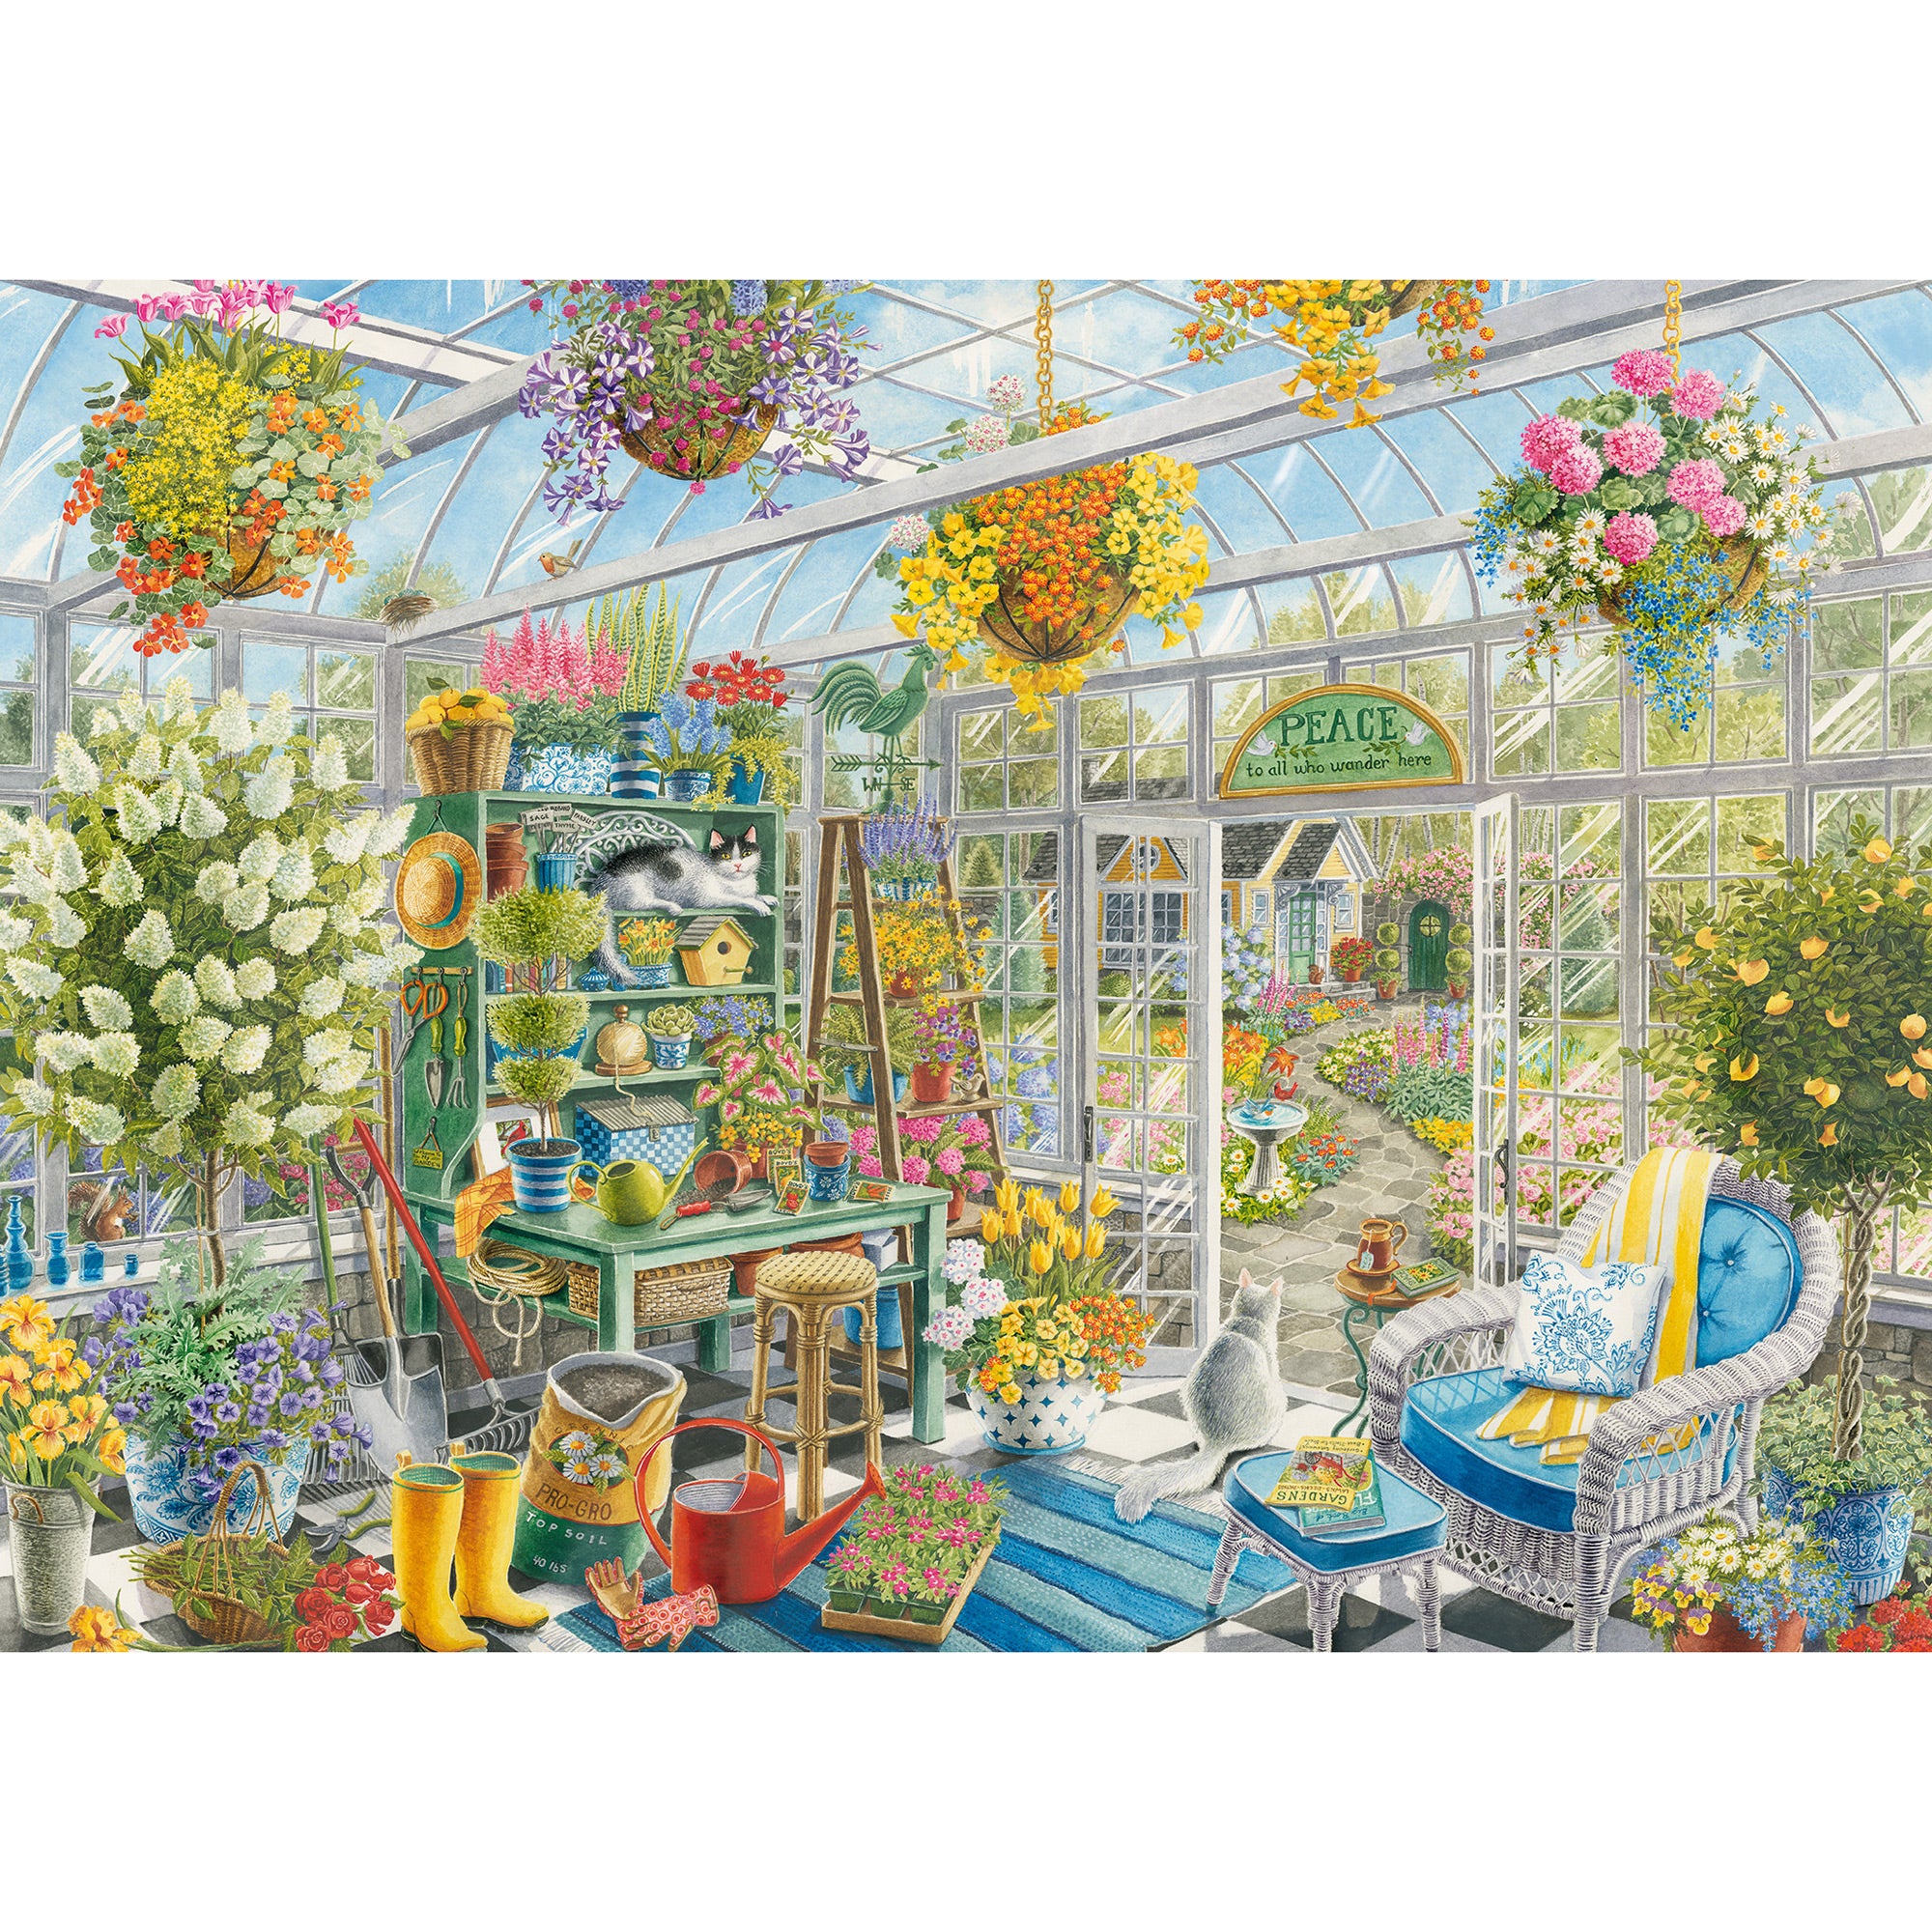 Ravensburger Paris Impressions 1000 Piece Jigsaw Puzzle for Adults - 16727  - Every Piece is Unique, Softclick Technology Means Pieces Fit Together